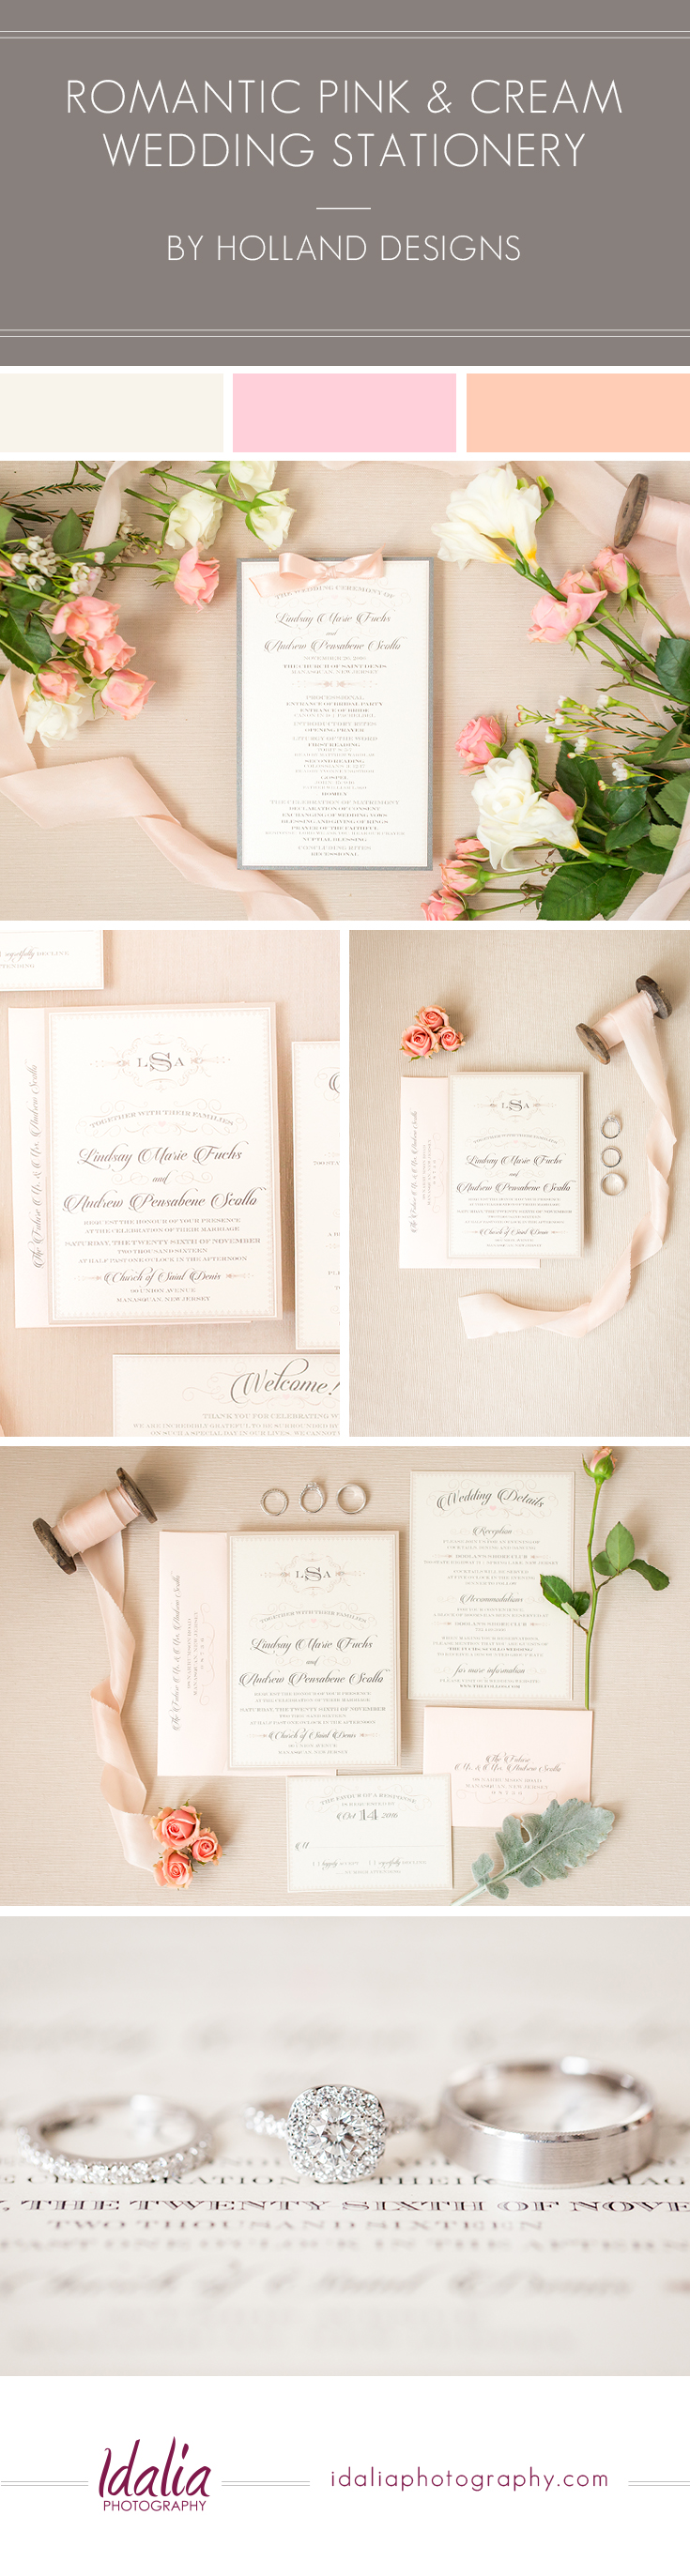 Romantic Pink and Cream Stationery by Holland Designs